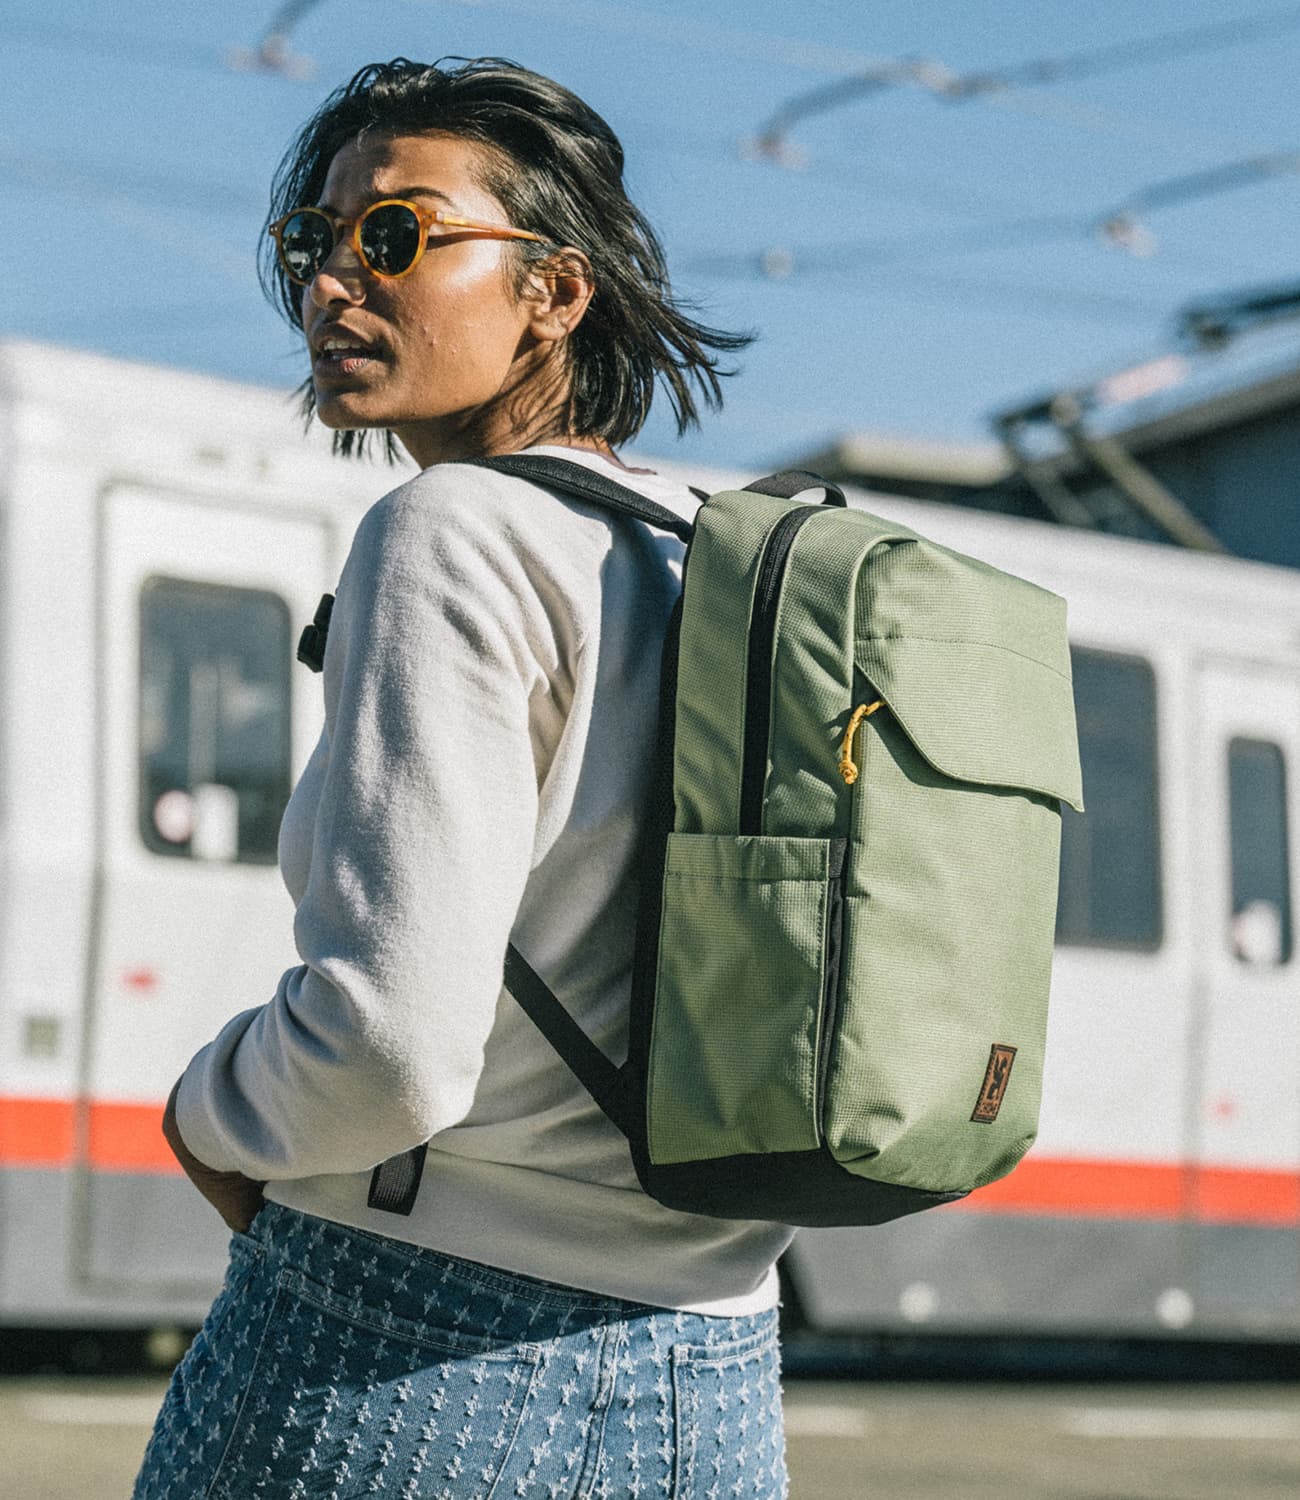 Ruckas 14L Backpack worn by a person commuting